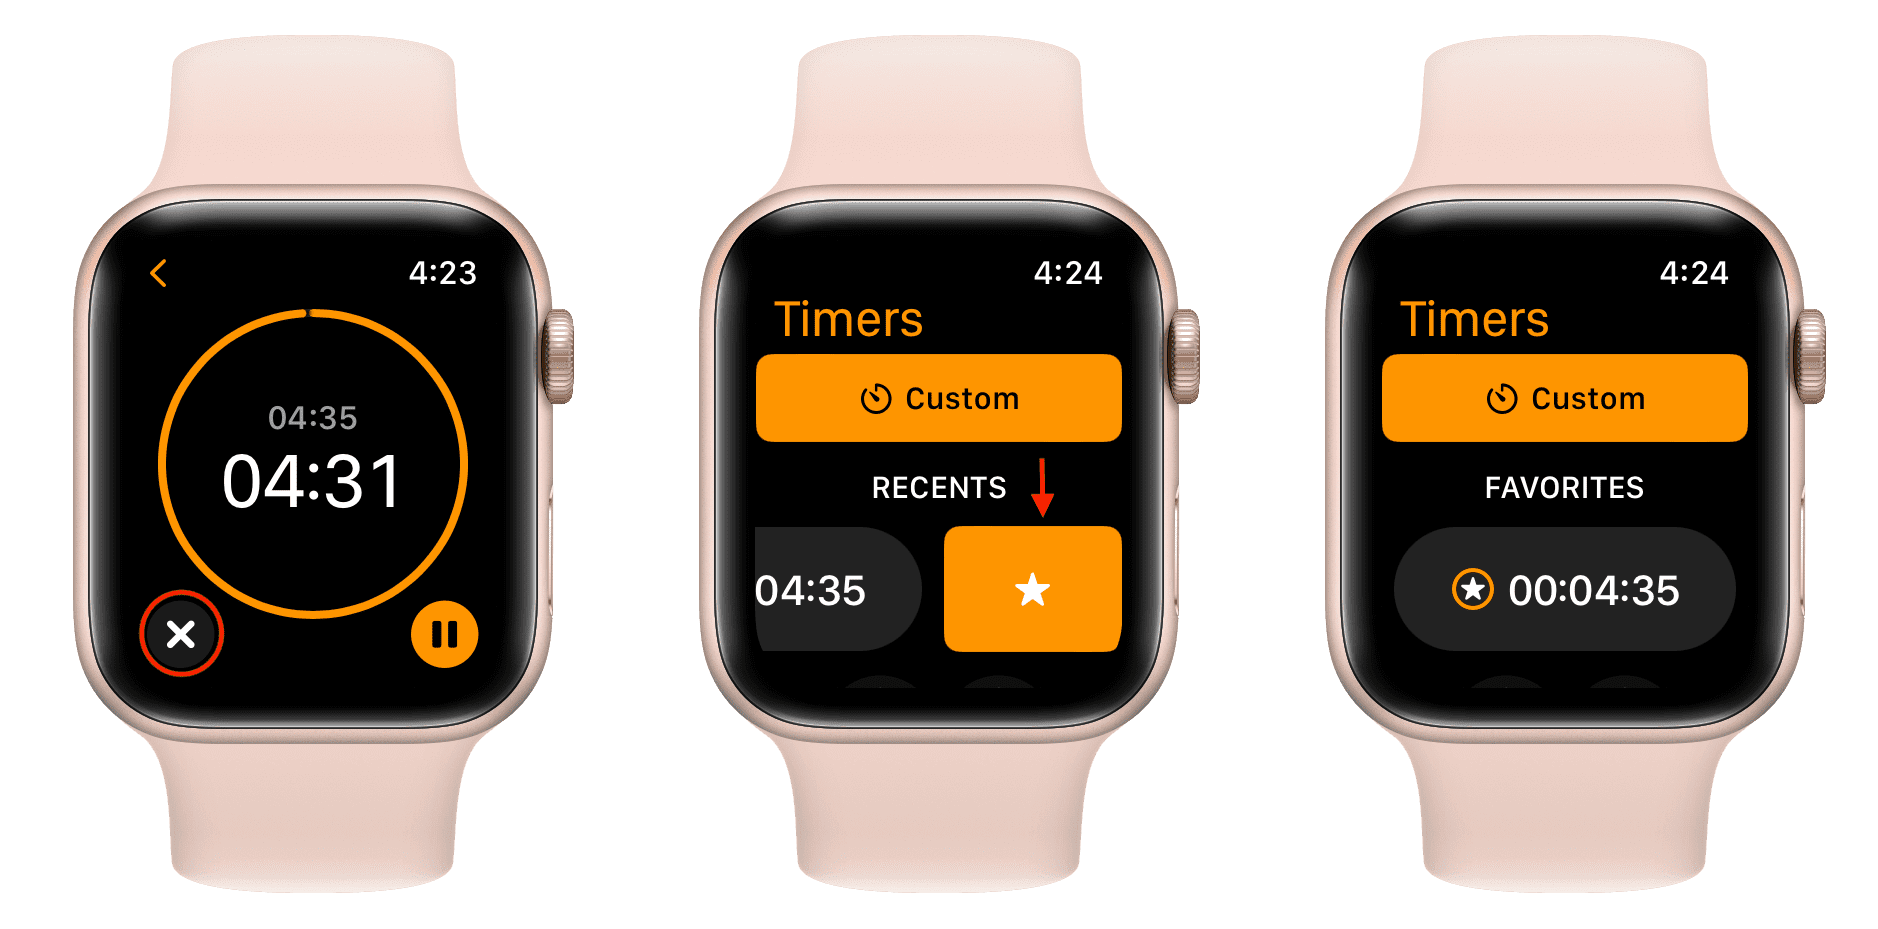 Set a custom timer duration as a favorite on Apple Watch